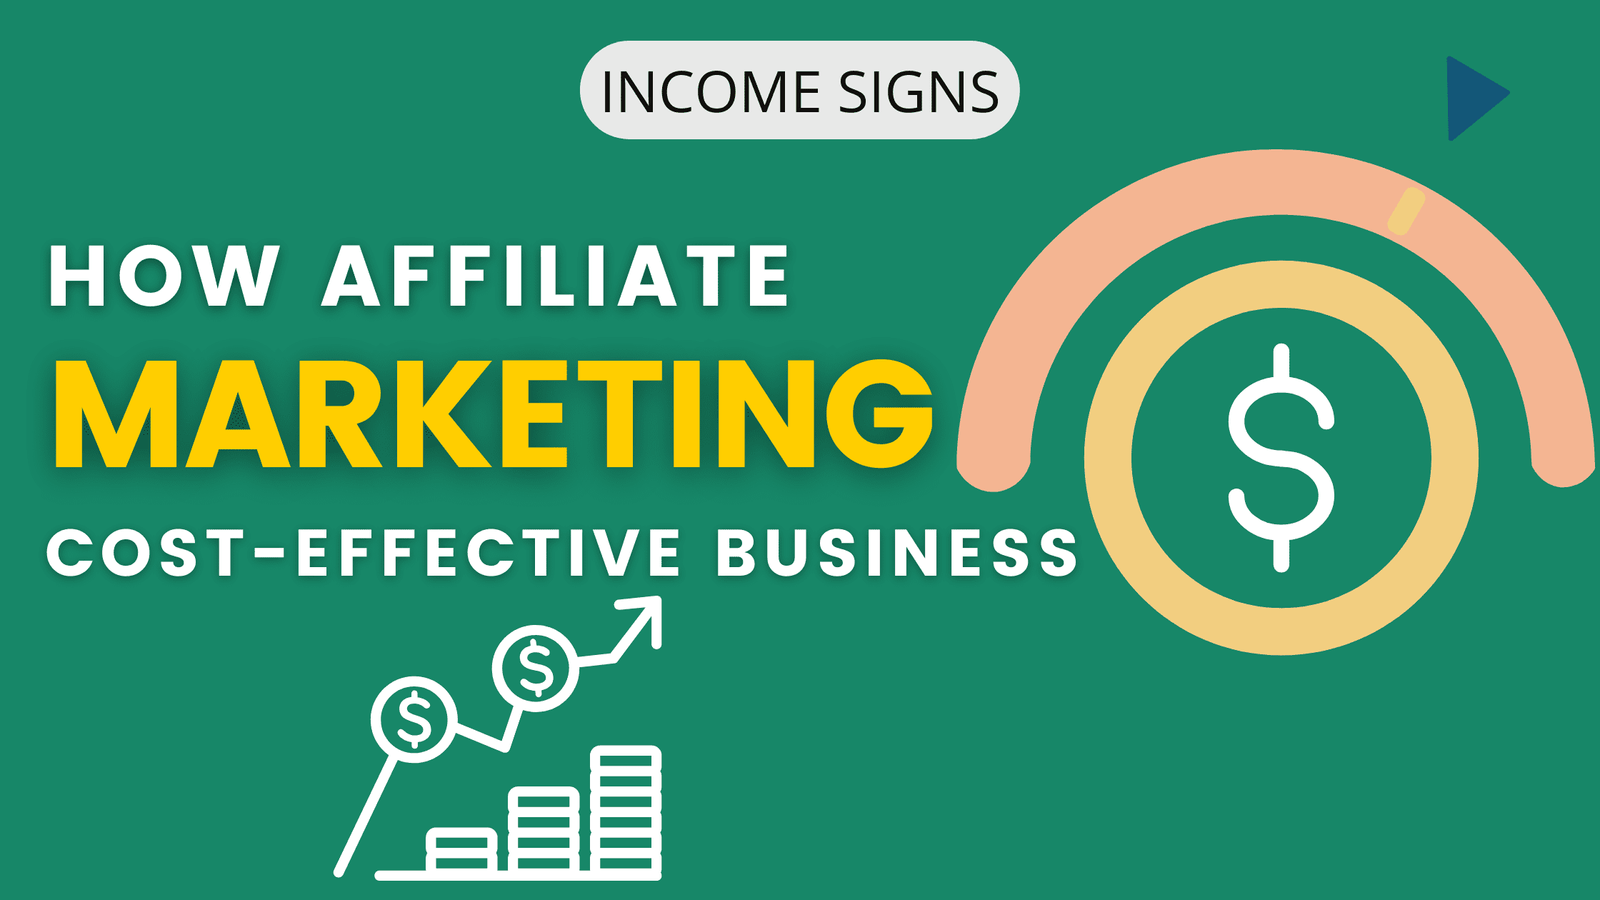 How Affiliate Marketing is a Cost-Effective Business